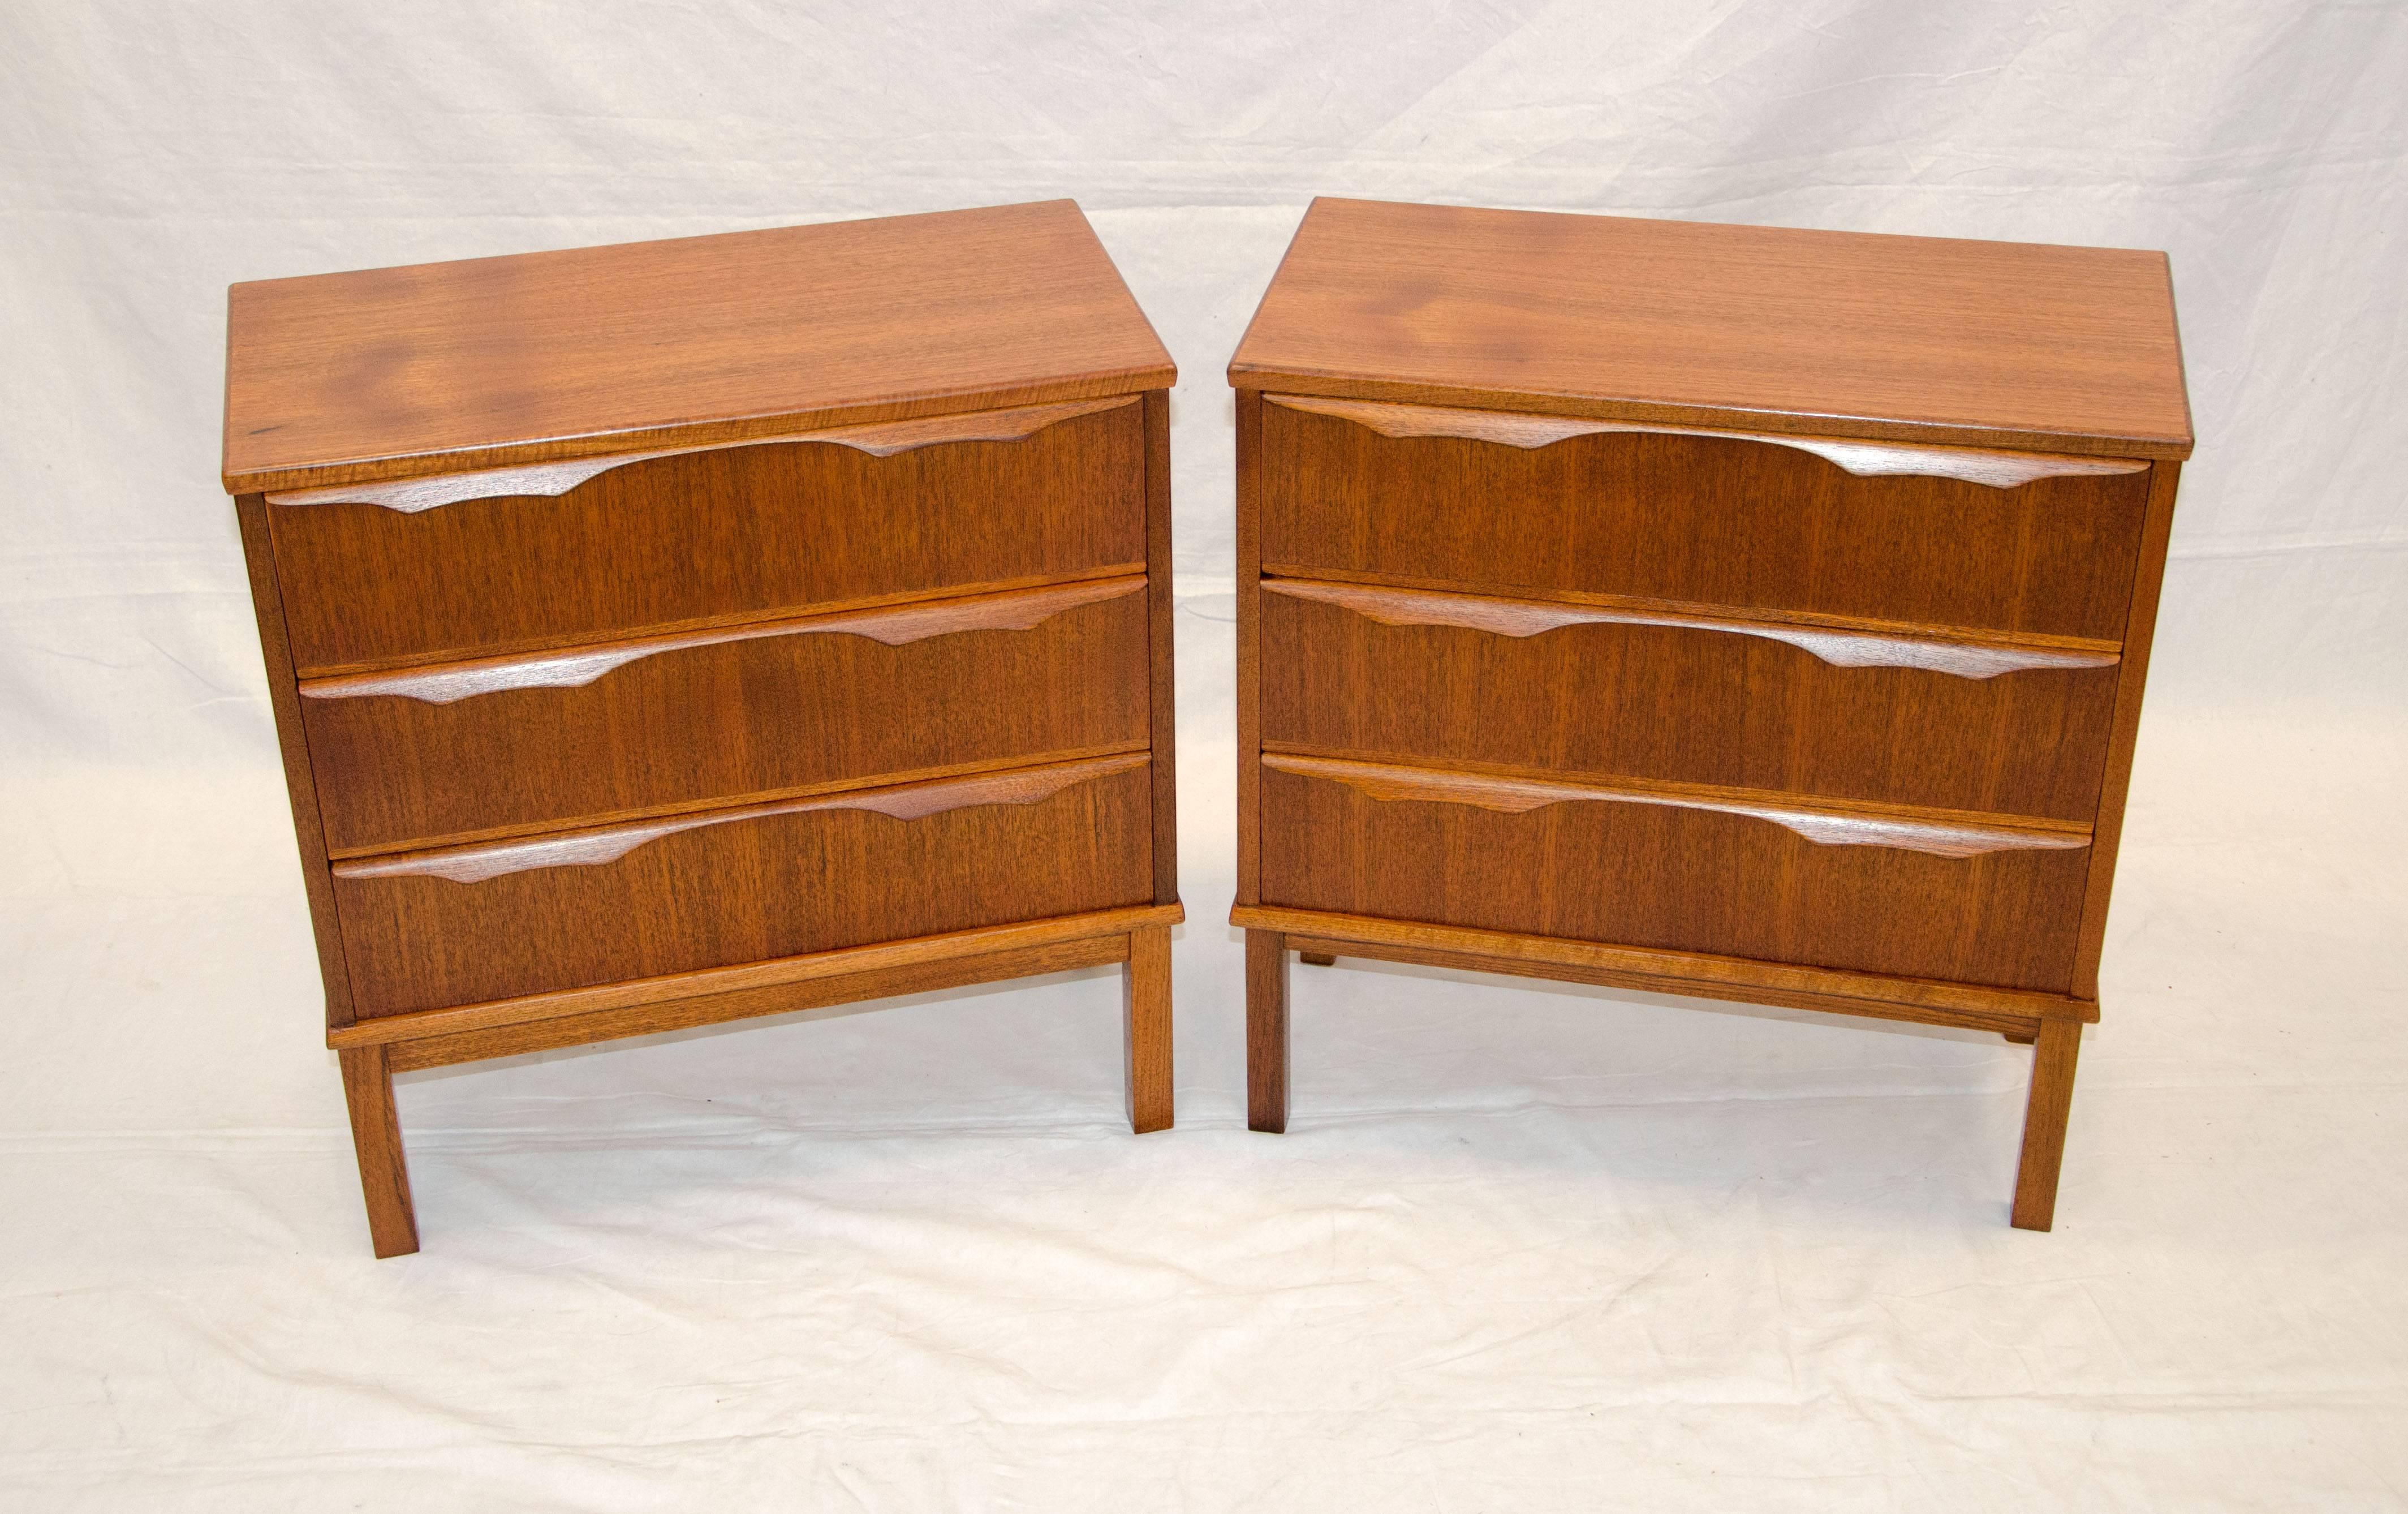  Very nice pair of Danish teak night stands with three storage drawers in each. Each drawer has sculpted handles attached at the top. They are raised off thee floor by 8